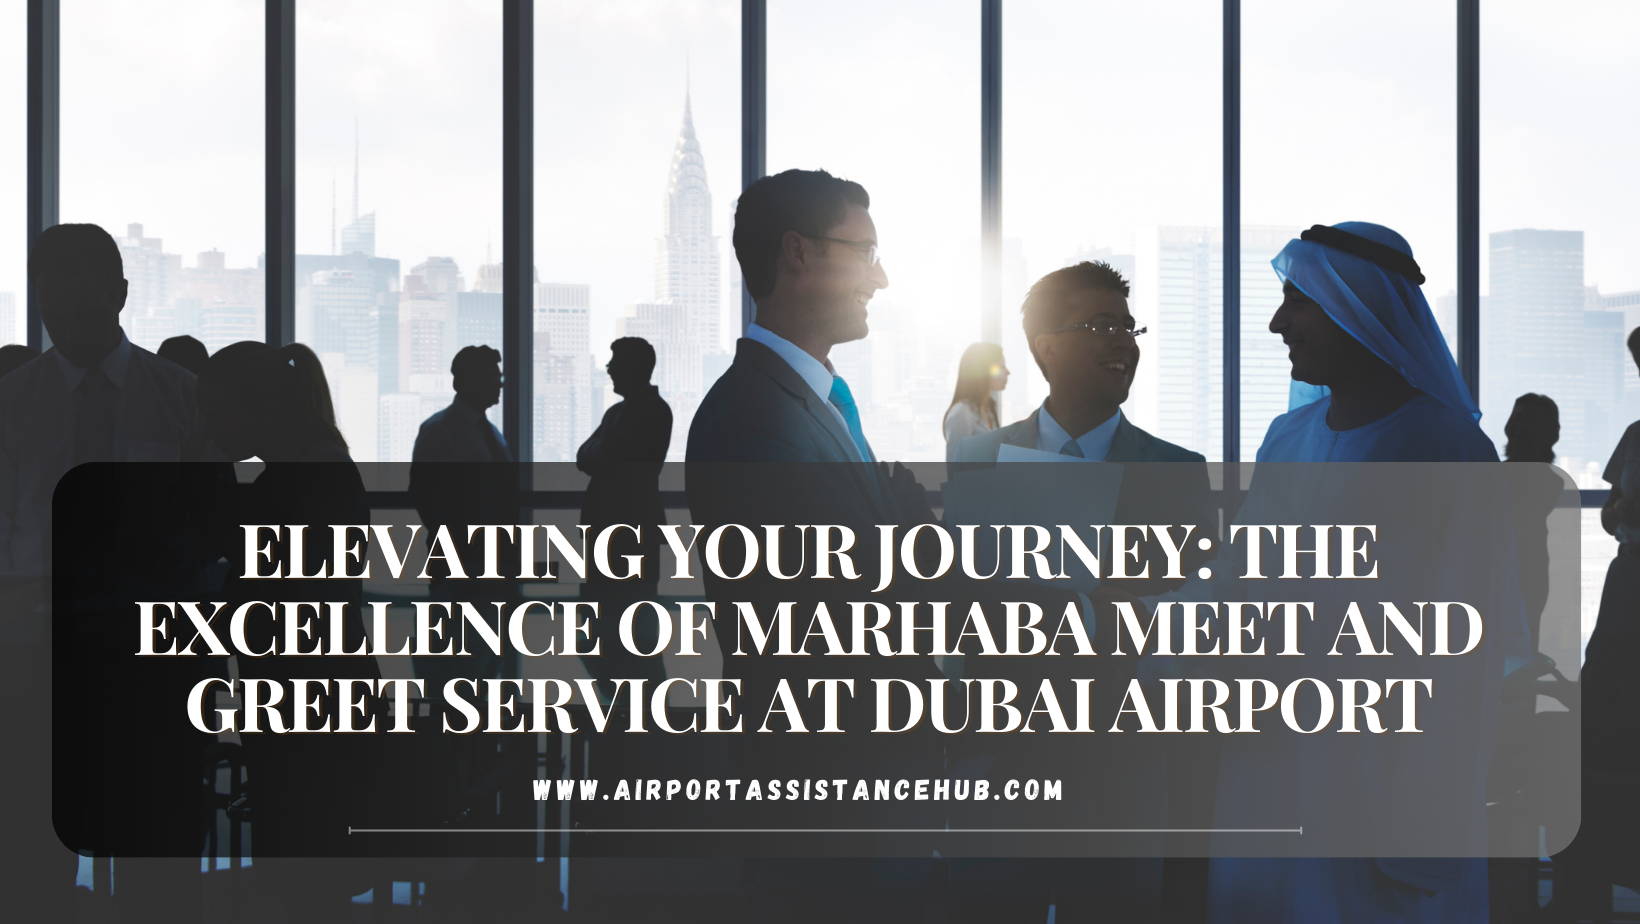 Elevating Your Journey: The Excellence of Marhaba Meet and Greet Service at Dubai Airport